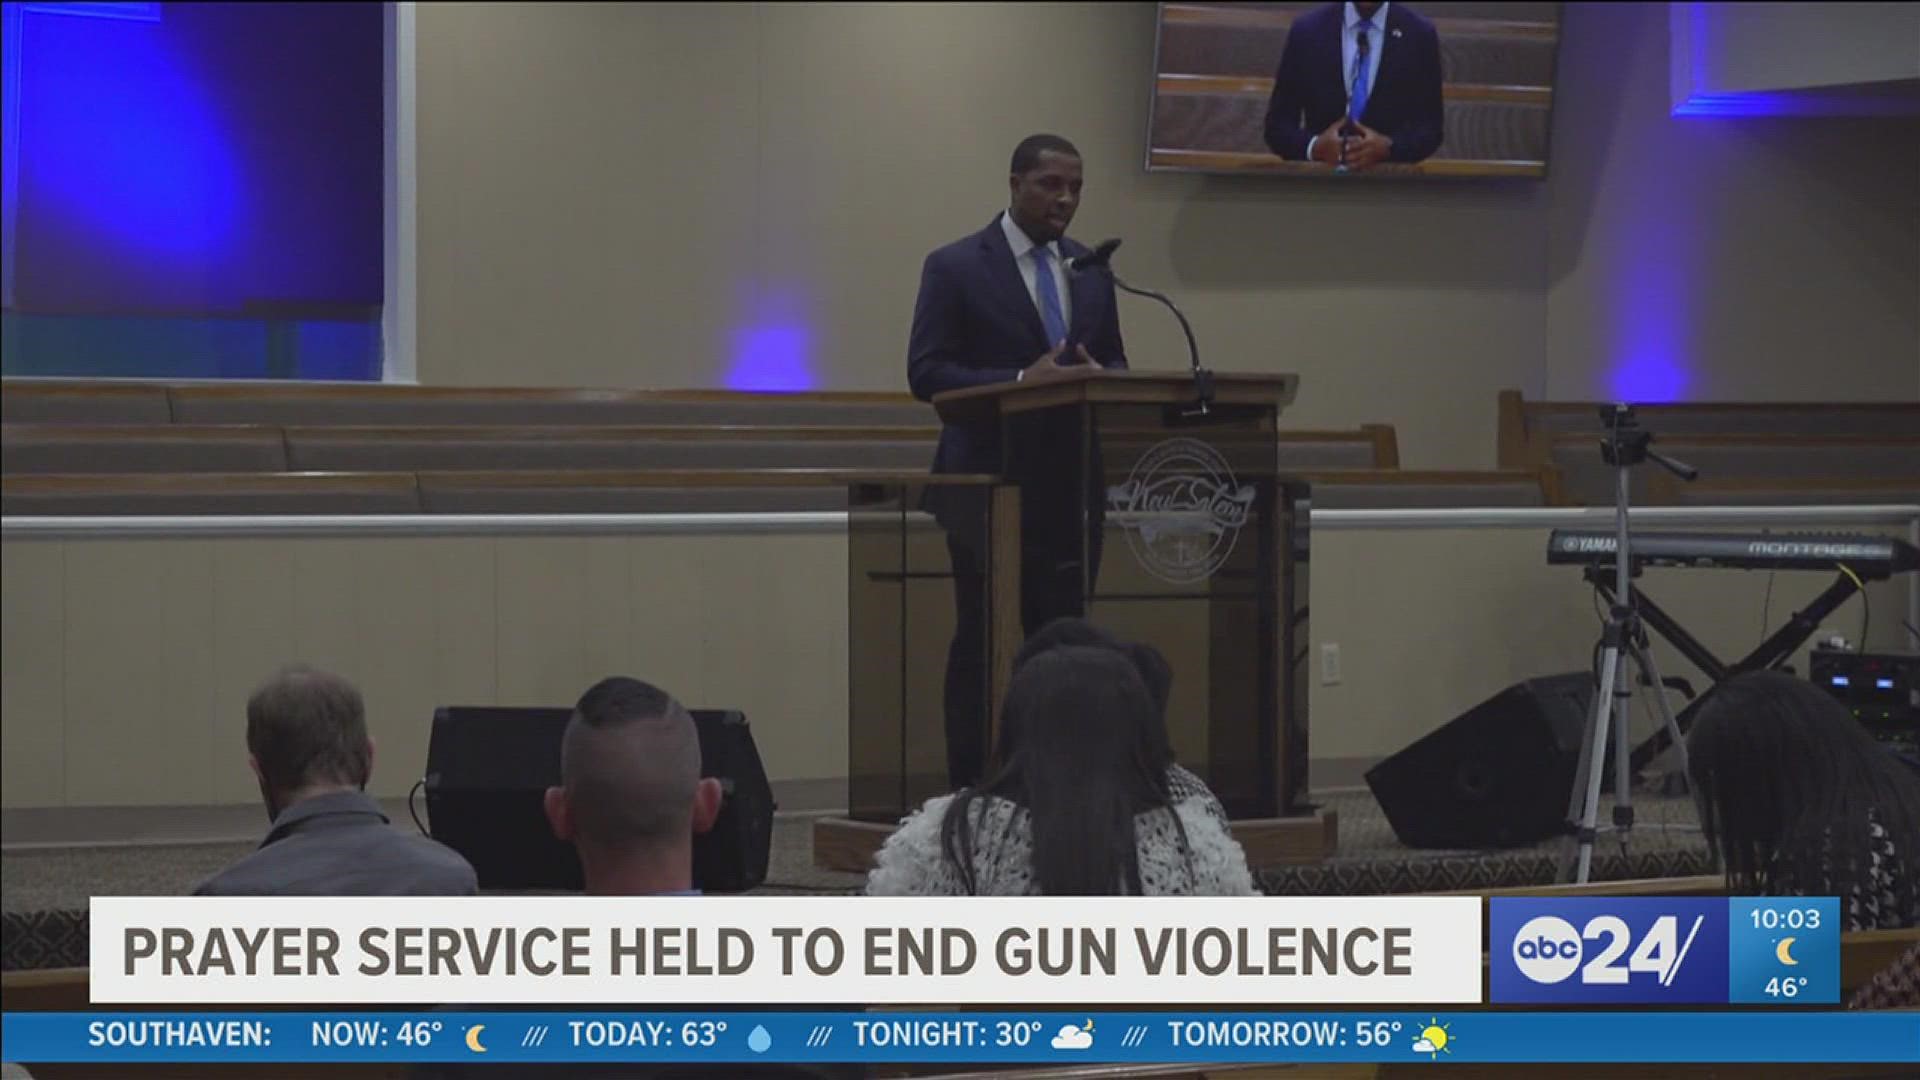 Eight pastors from across Memphis gathered to offer prayers of gun violence, forgiveness, unity of our community and families, healing and for the City of Memphis